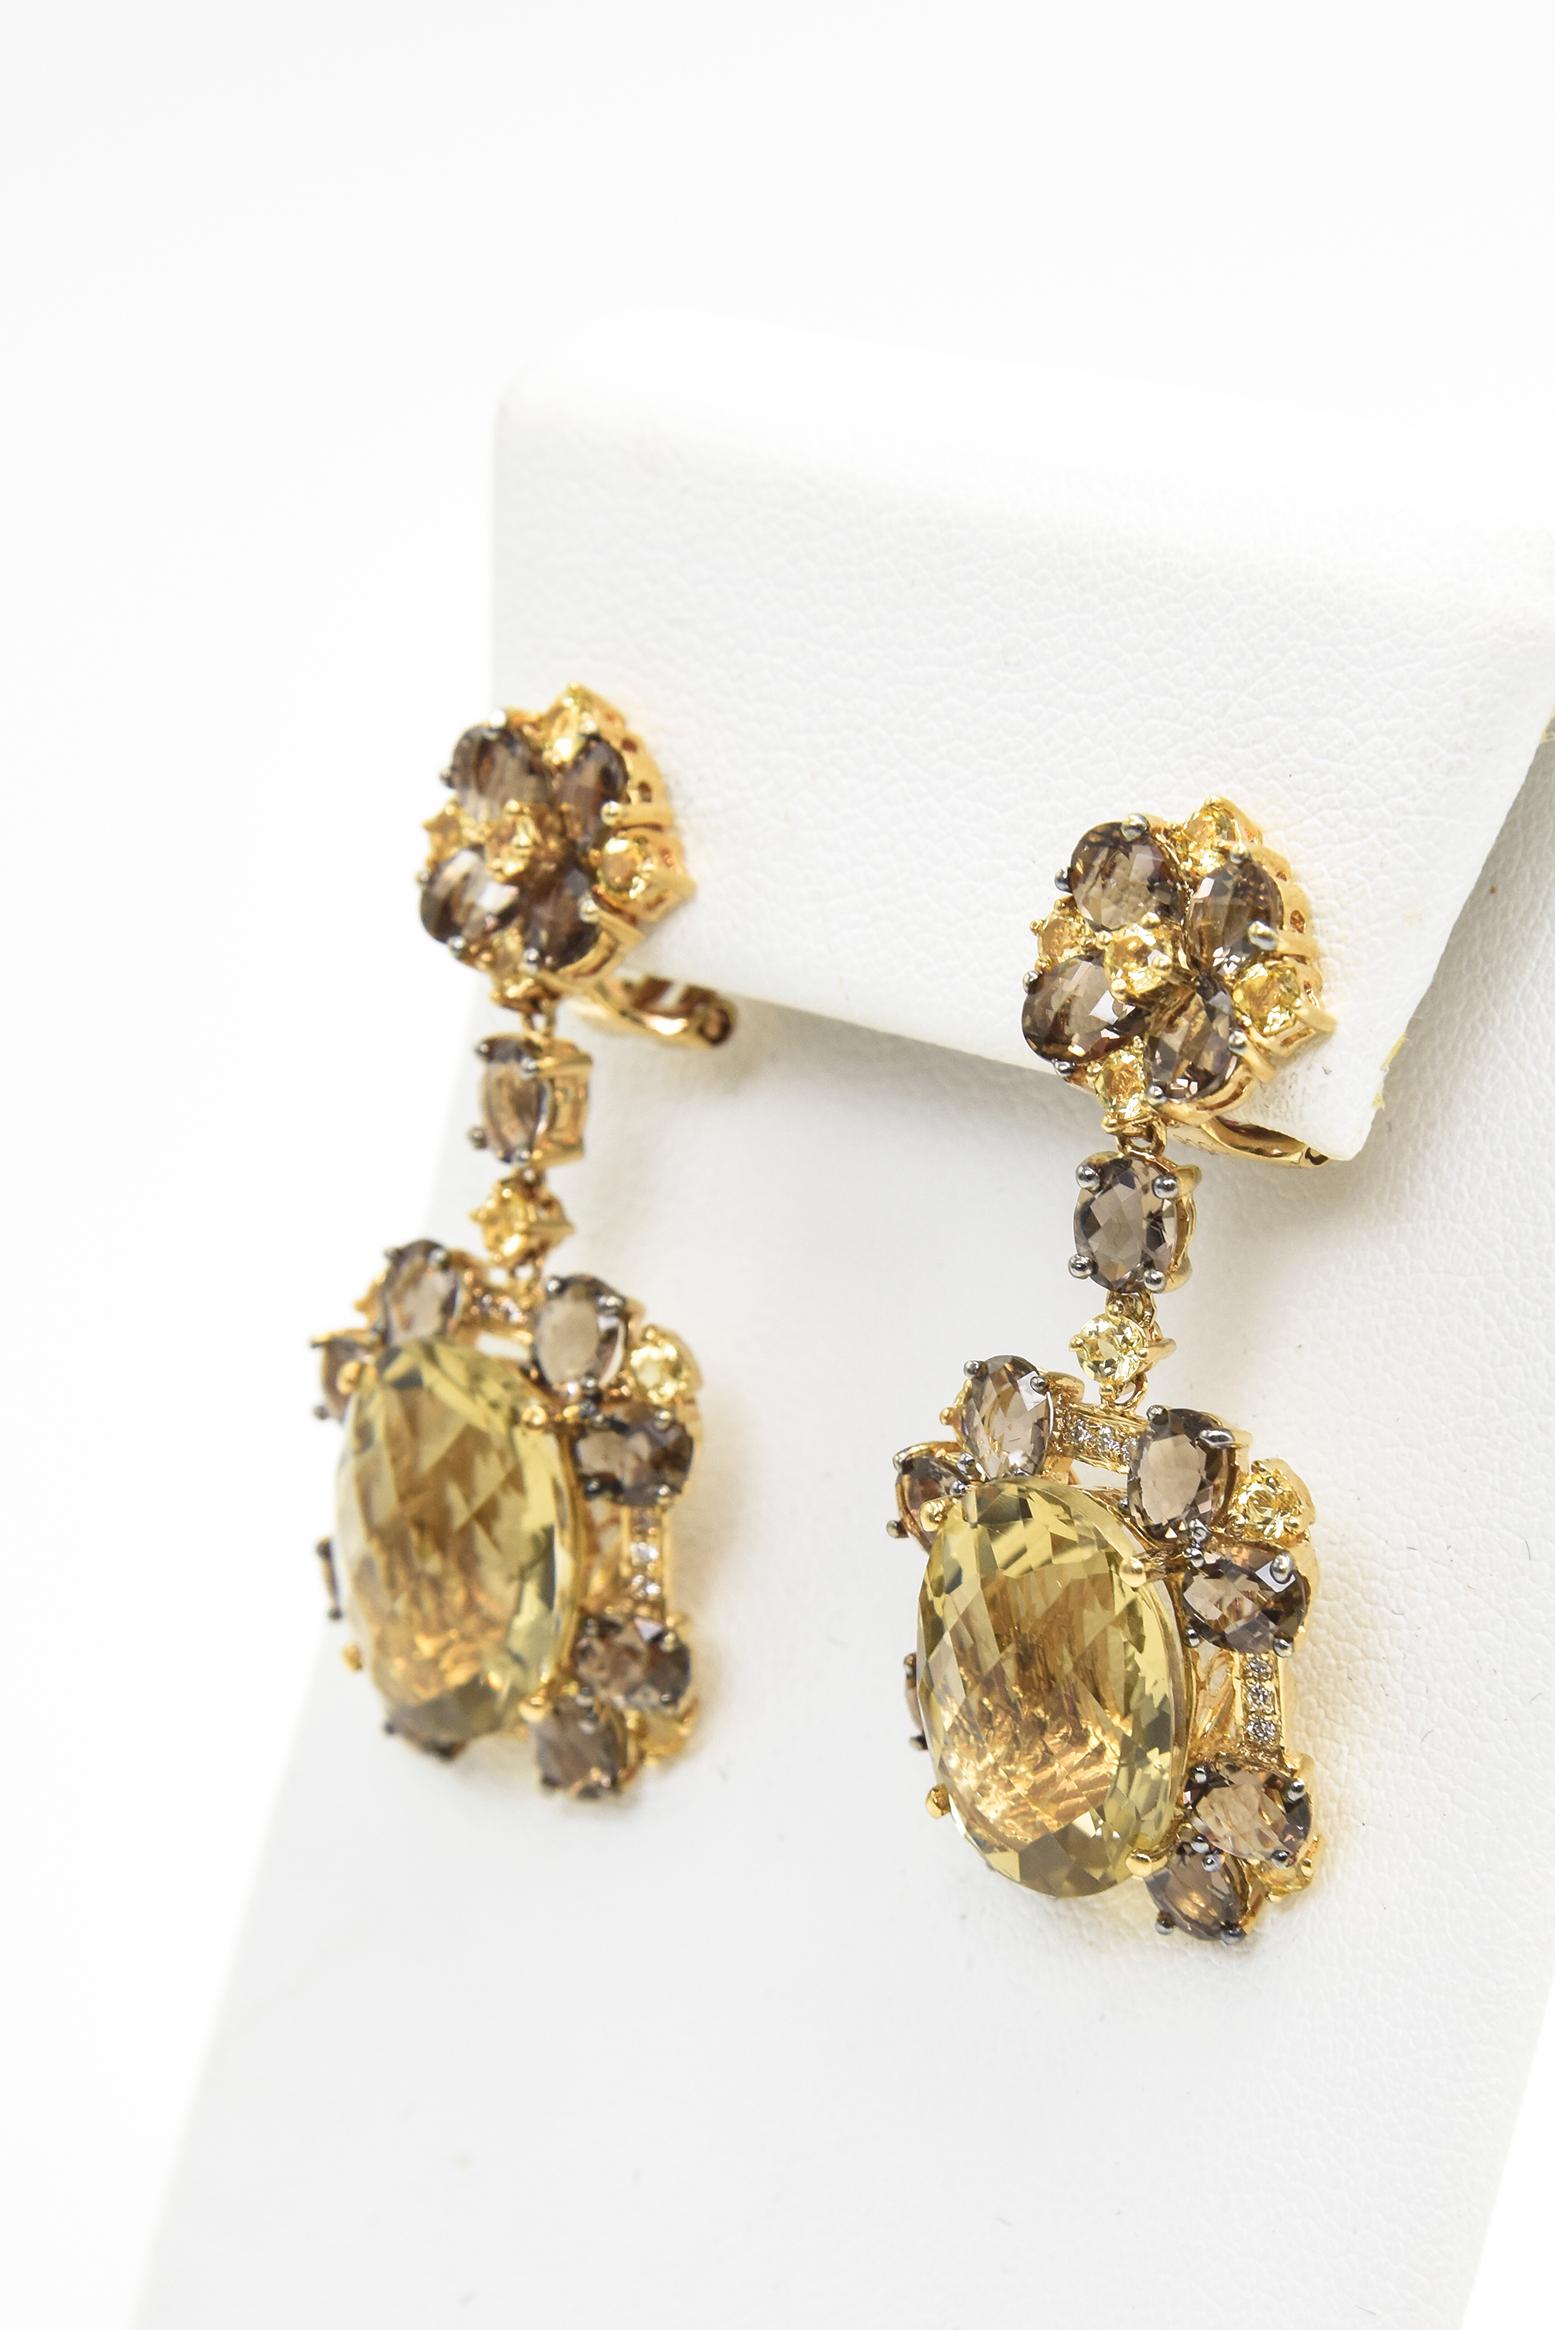 Lemon Quartz Smoky Topaz Yellow Beryl and Diamond Dangle Drop Floral Earrings In Excellent Condition For Sale In Miami Beach, FL